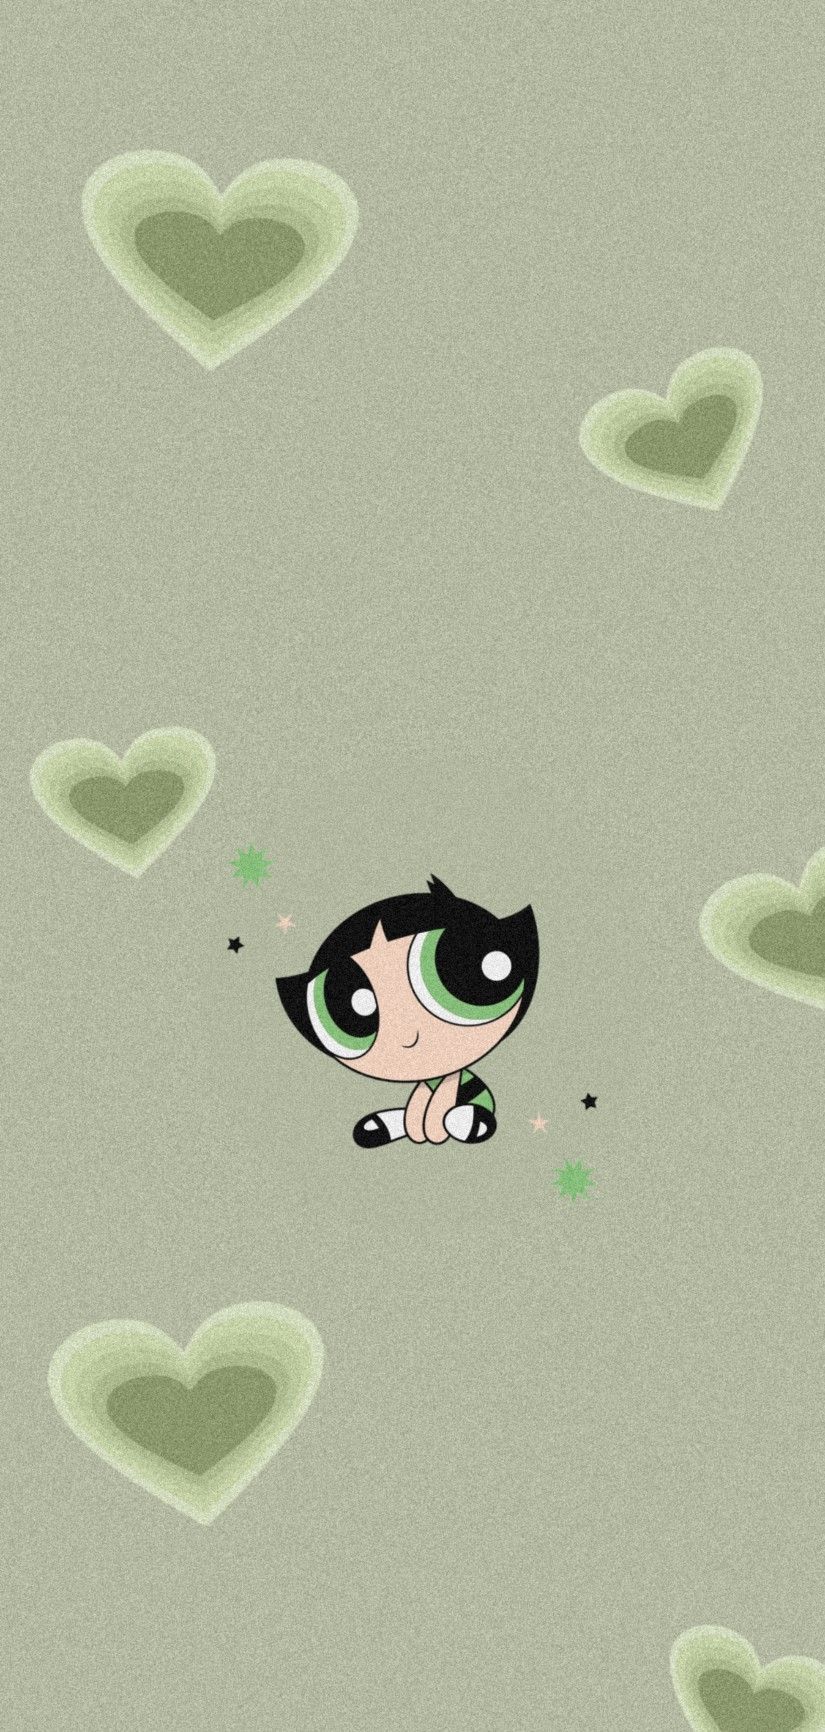 Buttercup wallpaper I made for my phone! - Soft green